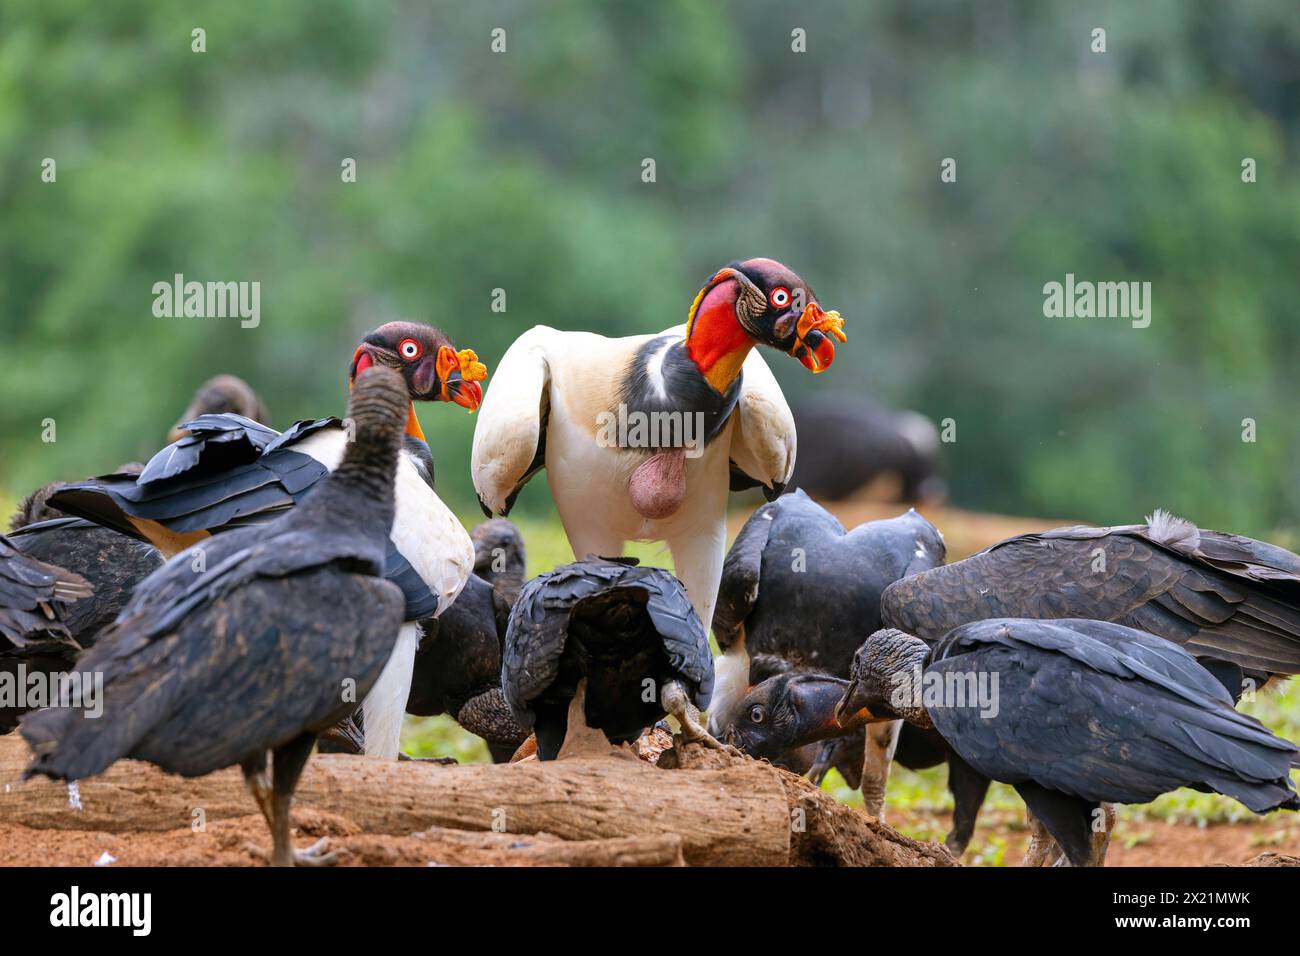 king vulture (Sarcorhamphus papa), king uultures and raven vultures eating carrion together, Costa Rica, Boca Tapada Stock Photo